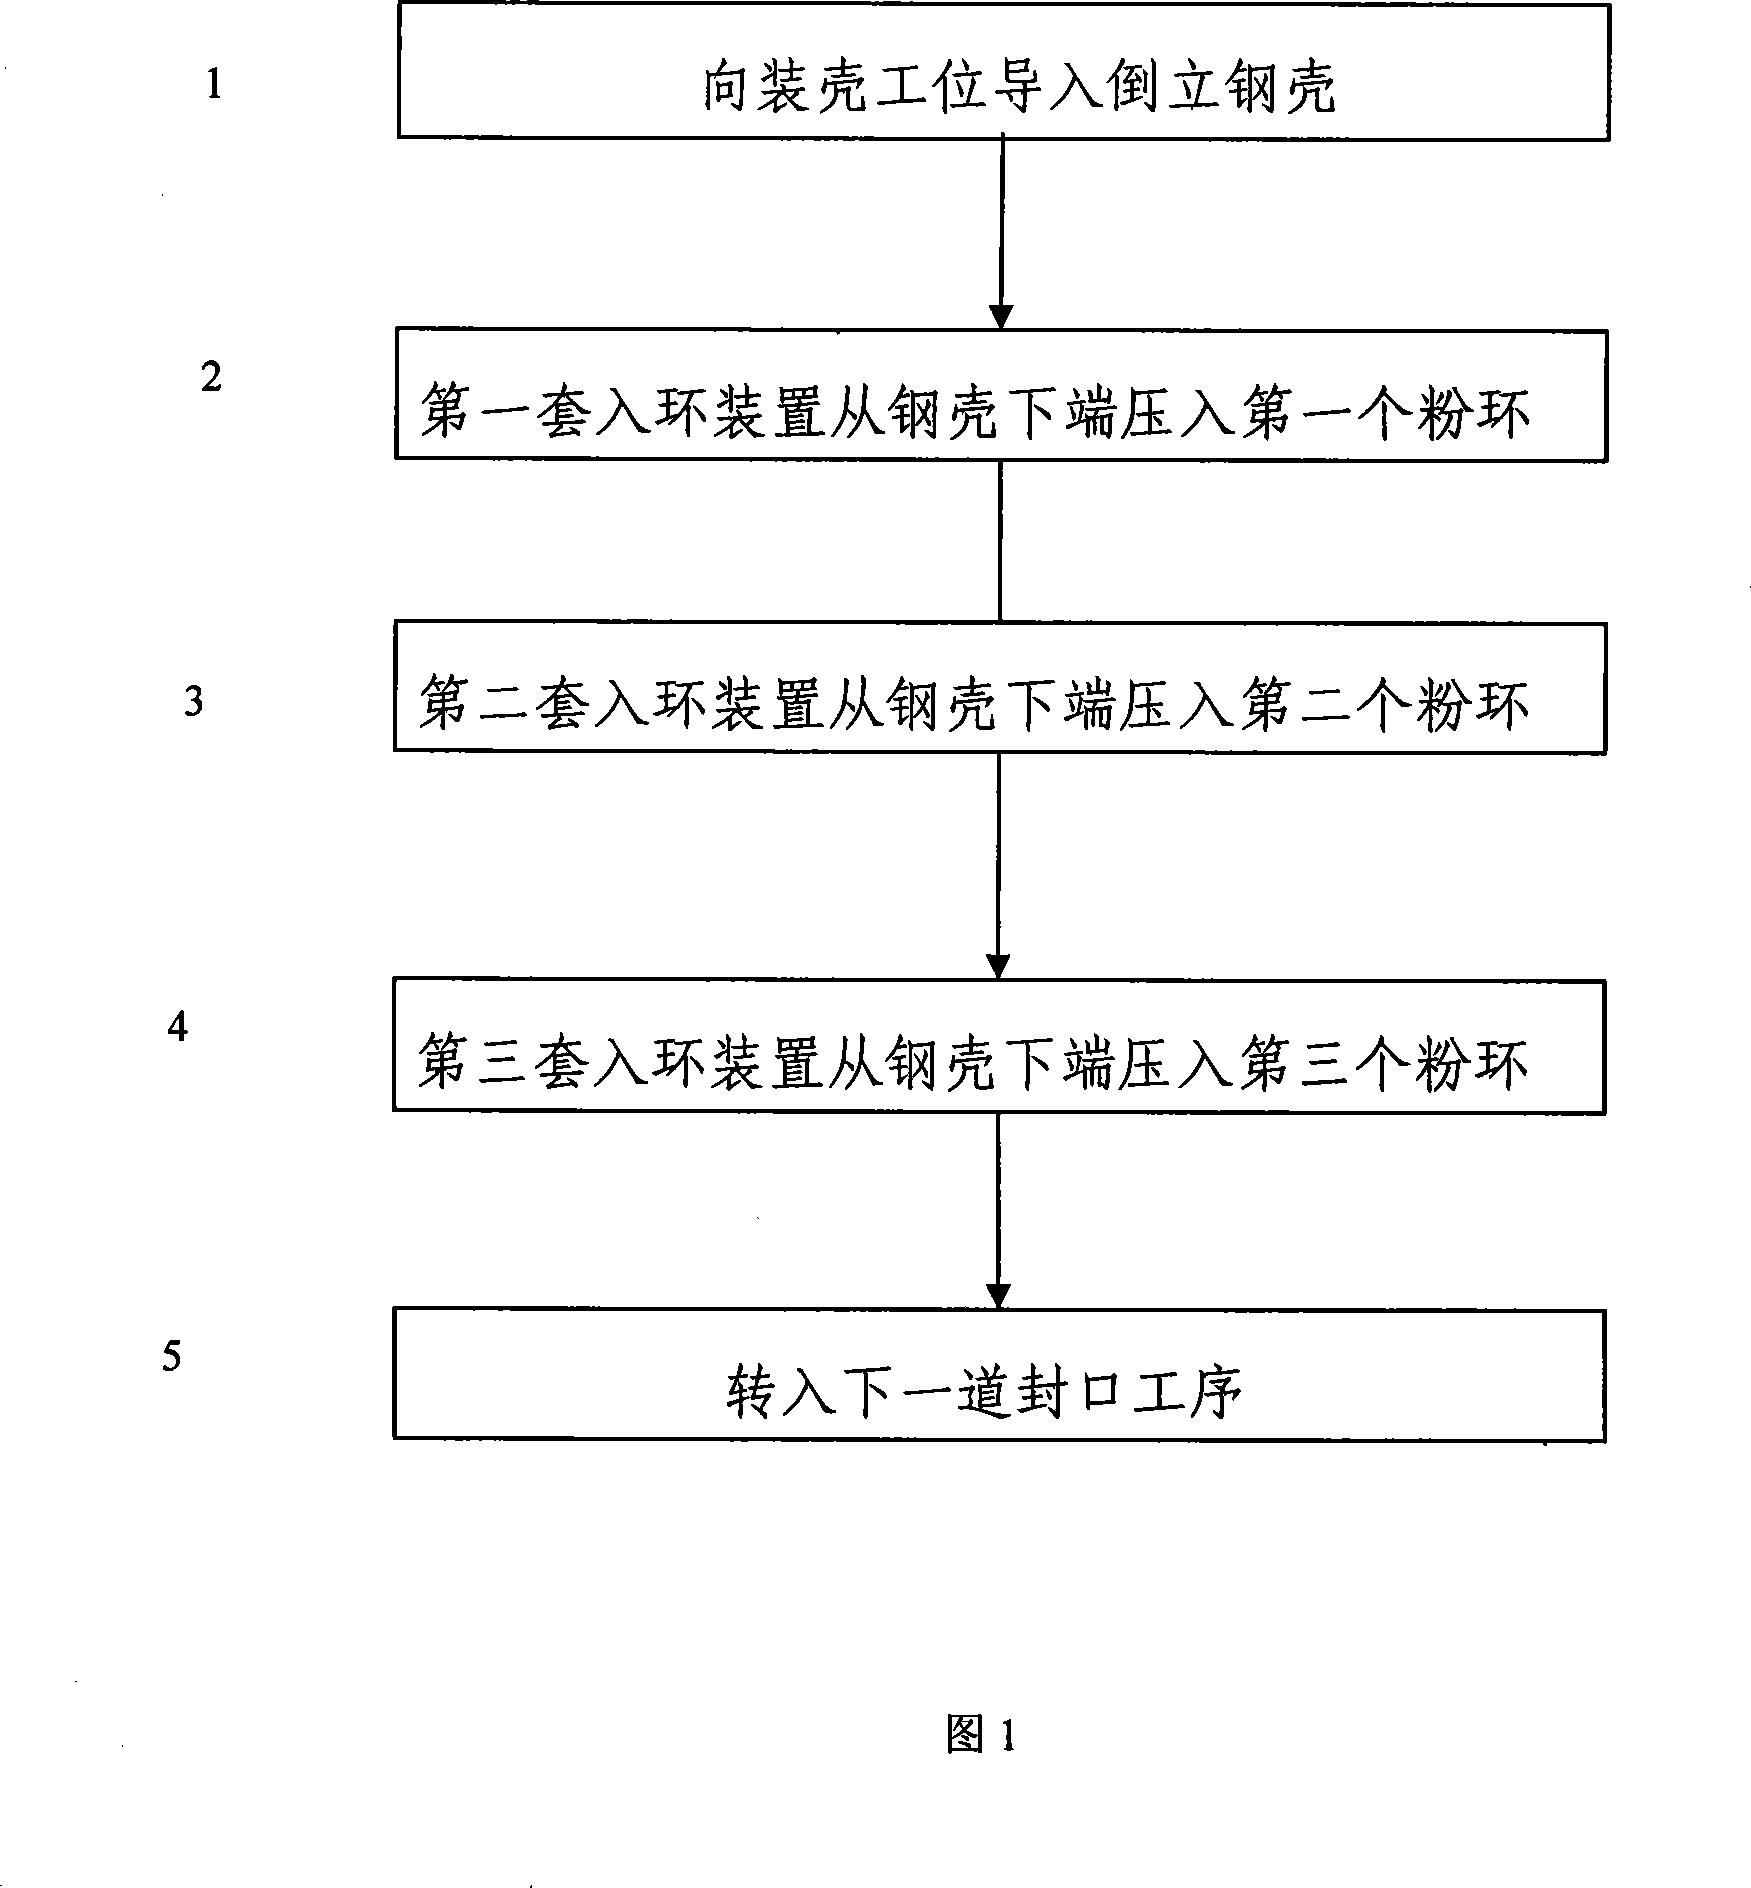 Process for battery powdery ring inverted insertion into steel case and its device for entering ring